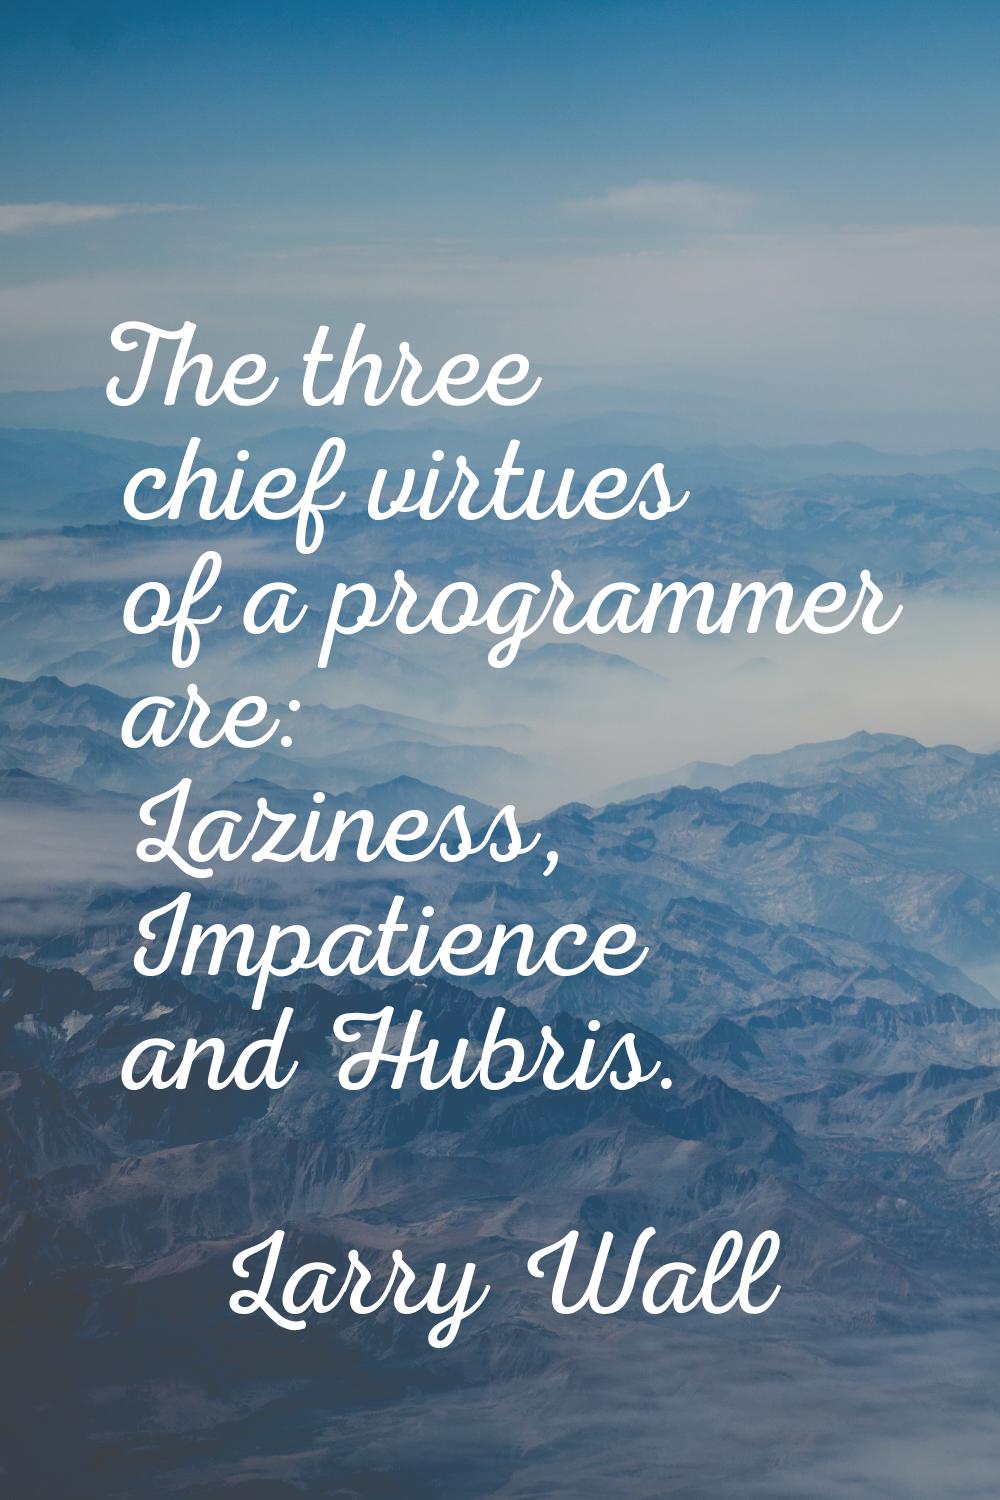 The three chief virtues of a programmer are: Laziness, Impatience and Hubris.